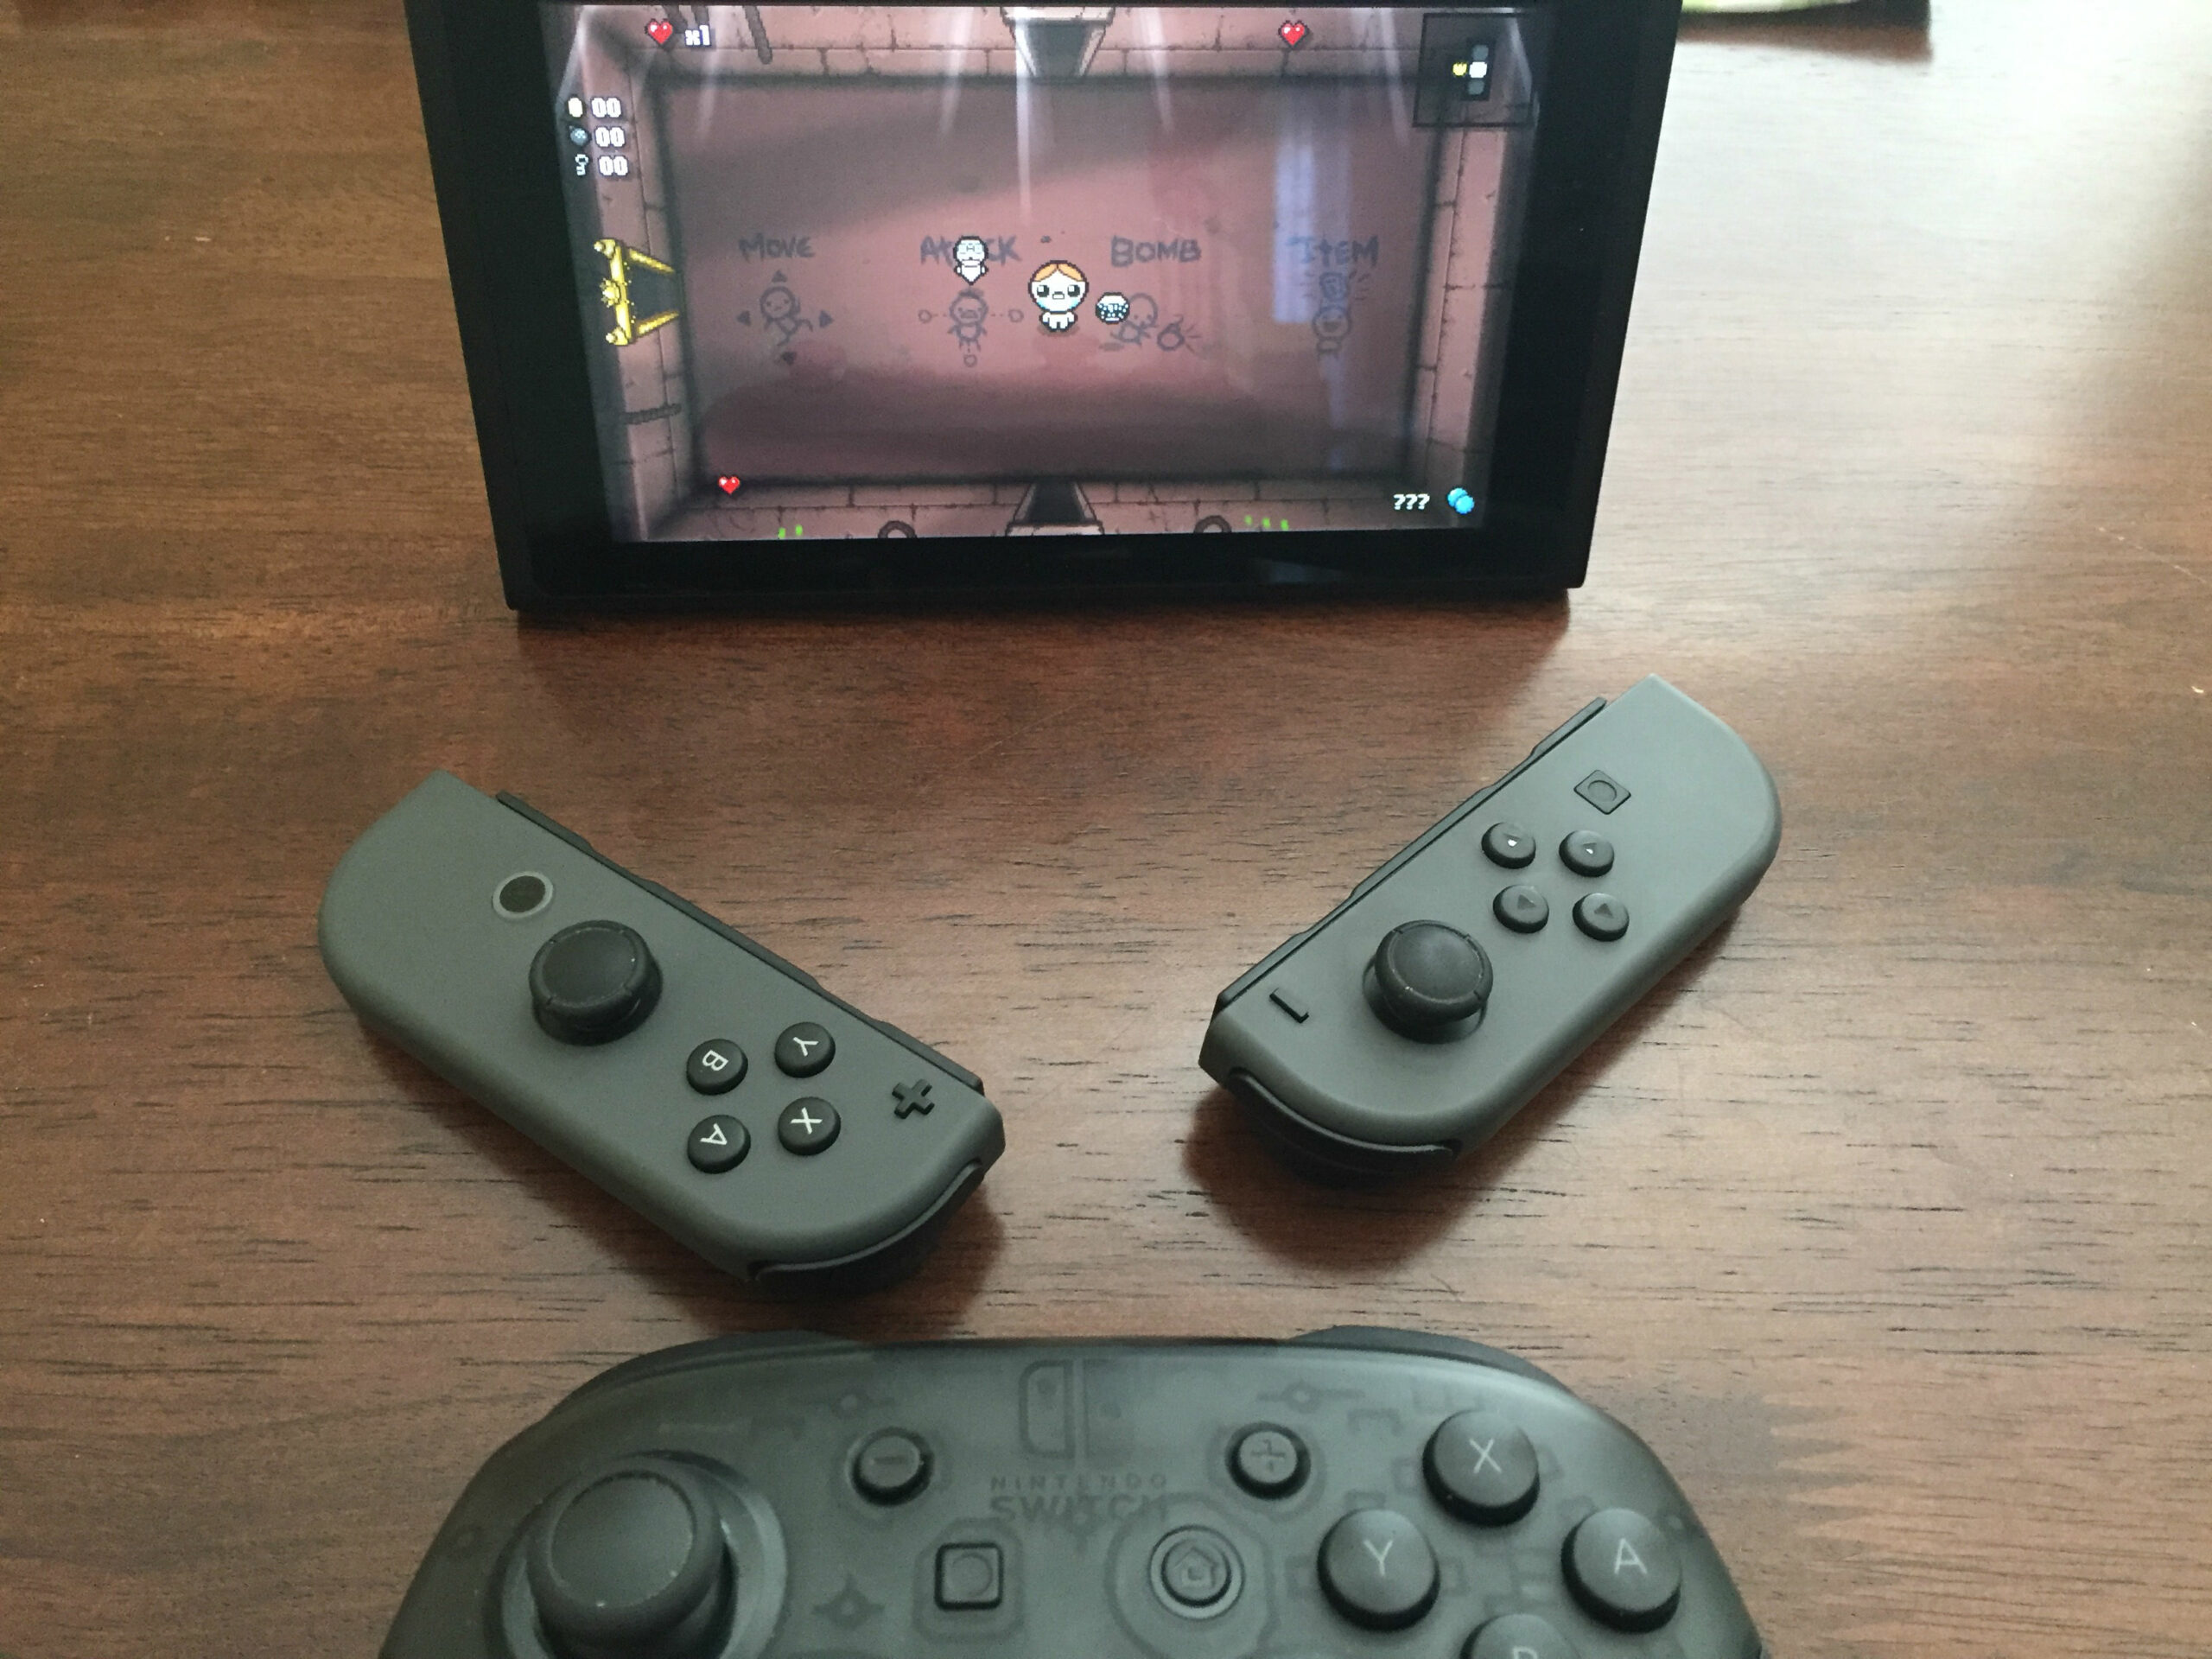 The best part of Binding of Isaac on the Switch? Easy co-op